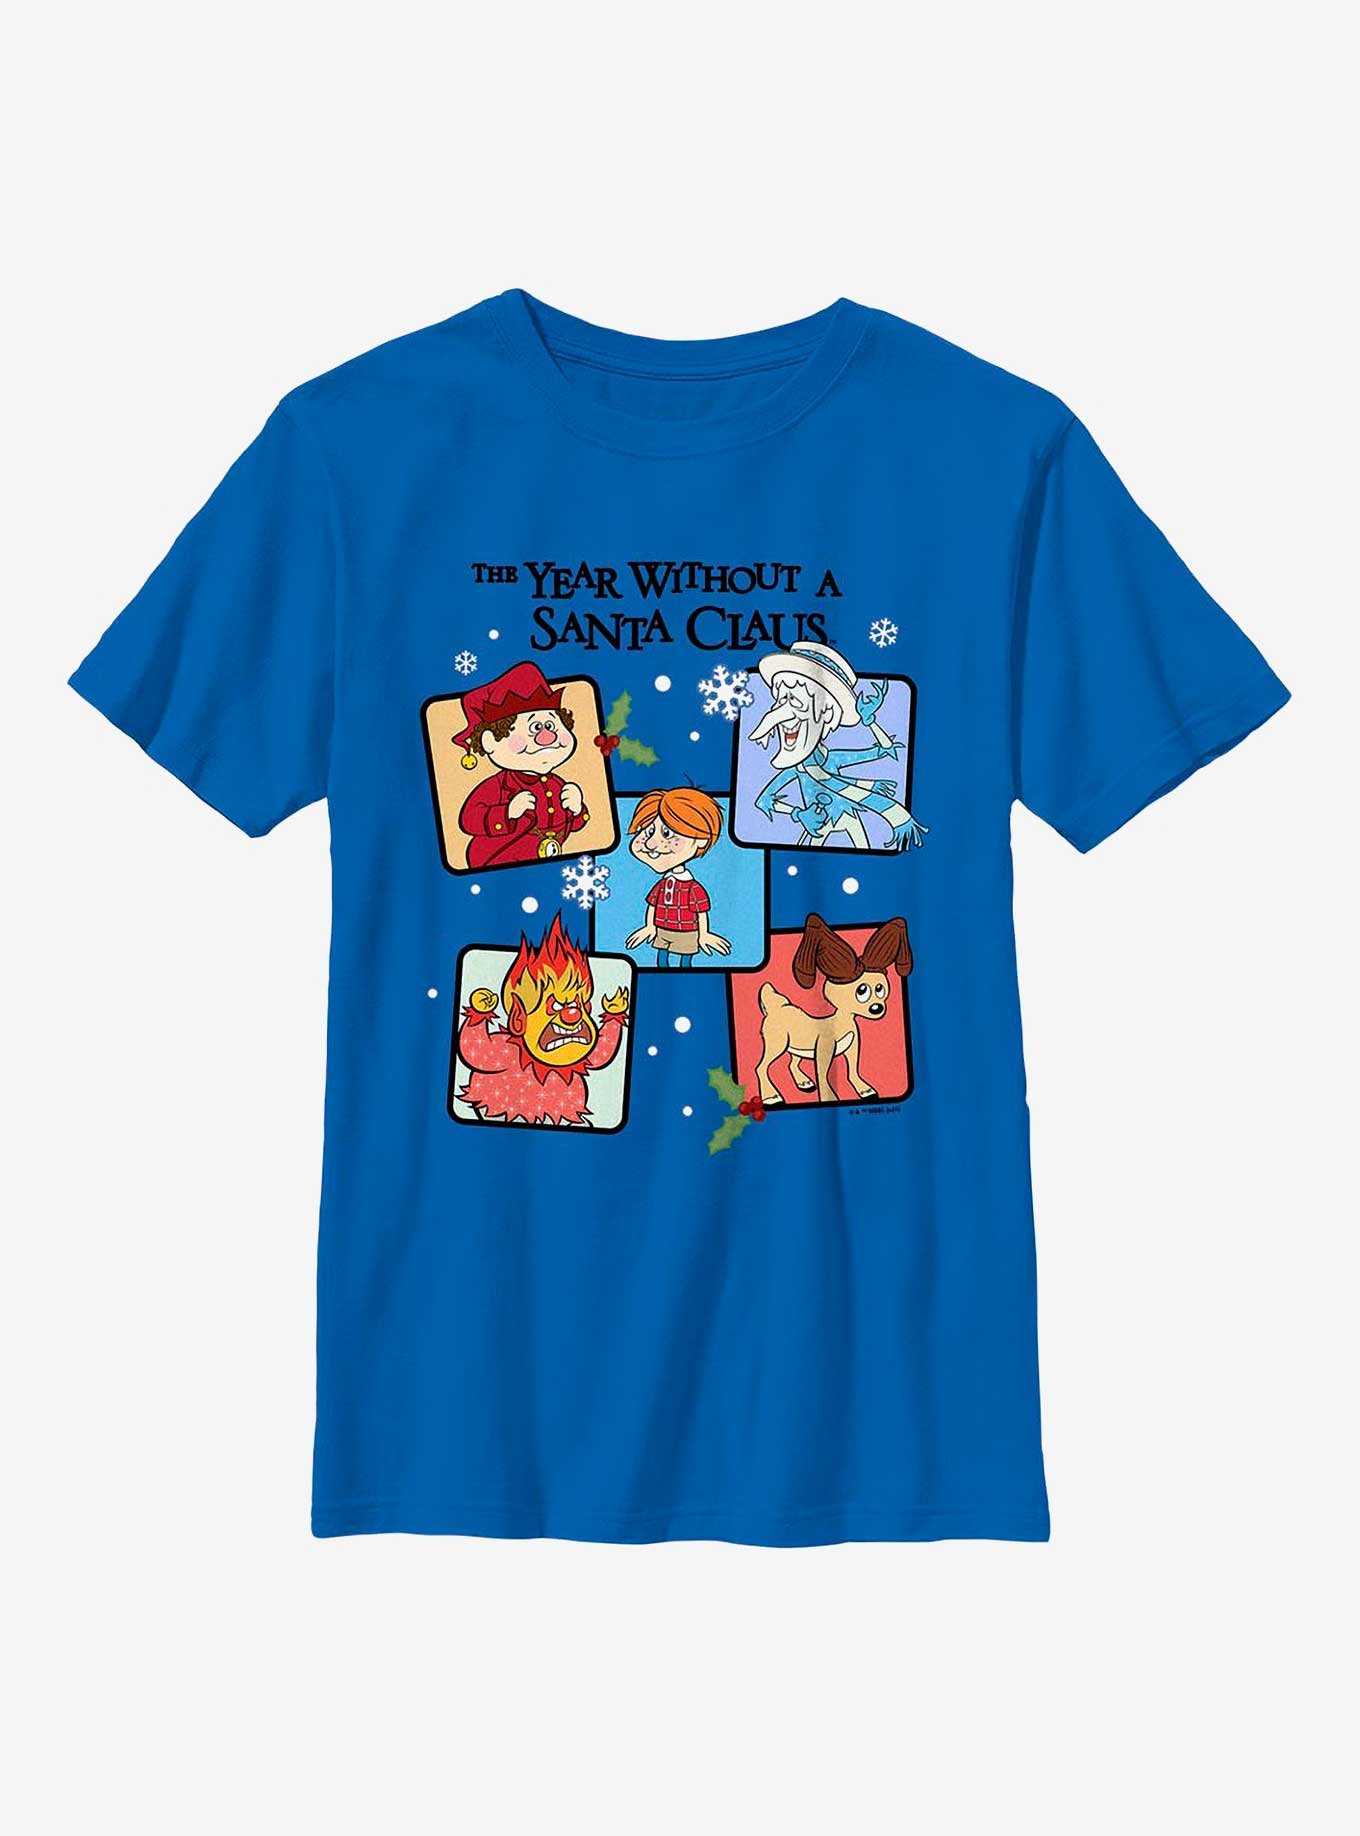 The Year Without Santa Claus Box Up Youth T-Shirt, , hi-res